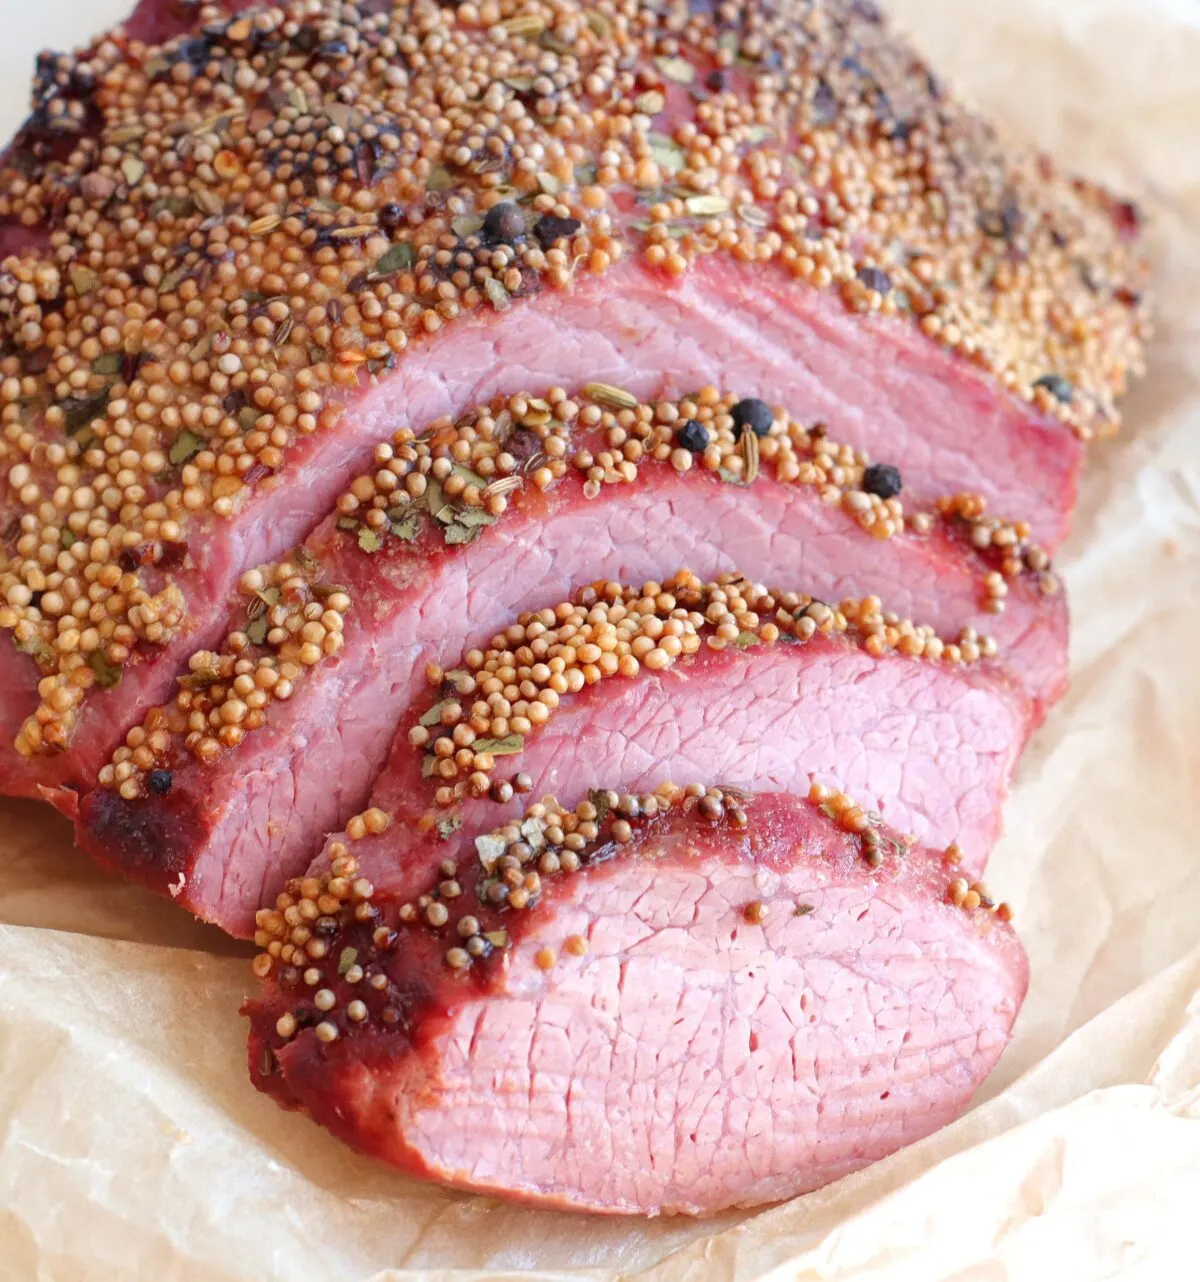 Looking for a delicious and easy corned beef recipe? Our air fryer corned beef recipe is perfect for St. Patrick's Day or any other day!